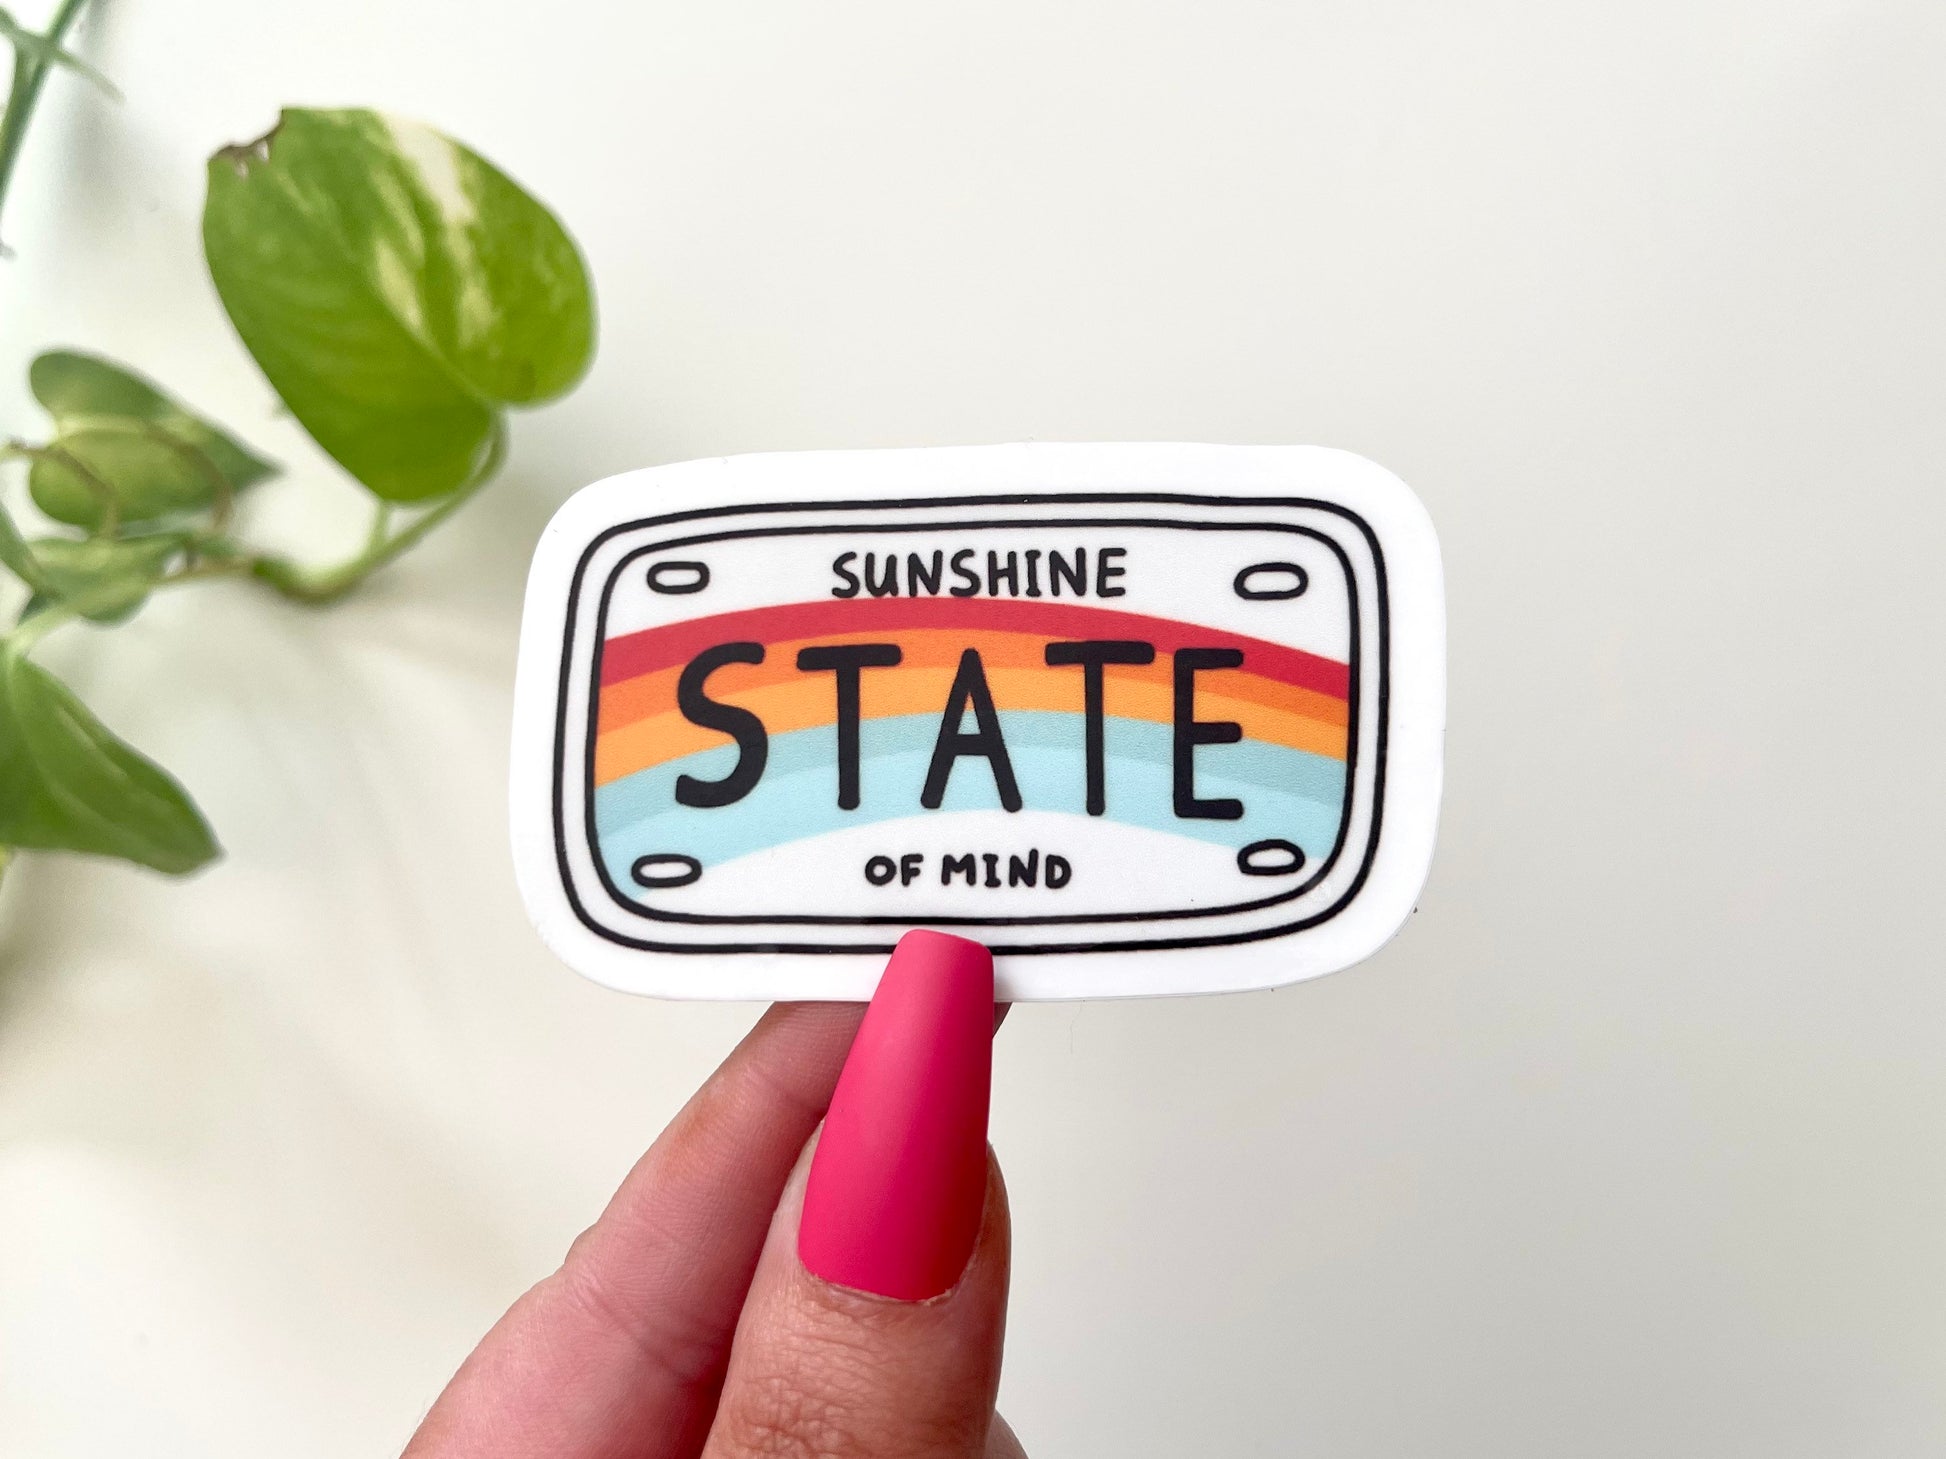 Sunshine State of Mind Waterproof Sticker, Positivity Sticker, Inspiring Stickers, Waterproof Decal, Tumbler Stickers, Waterbottle Decal